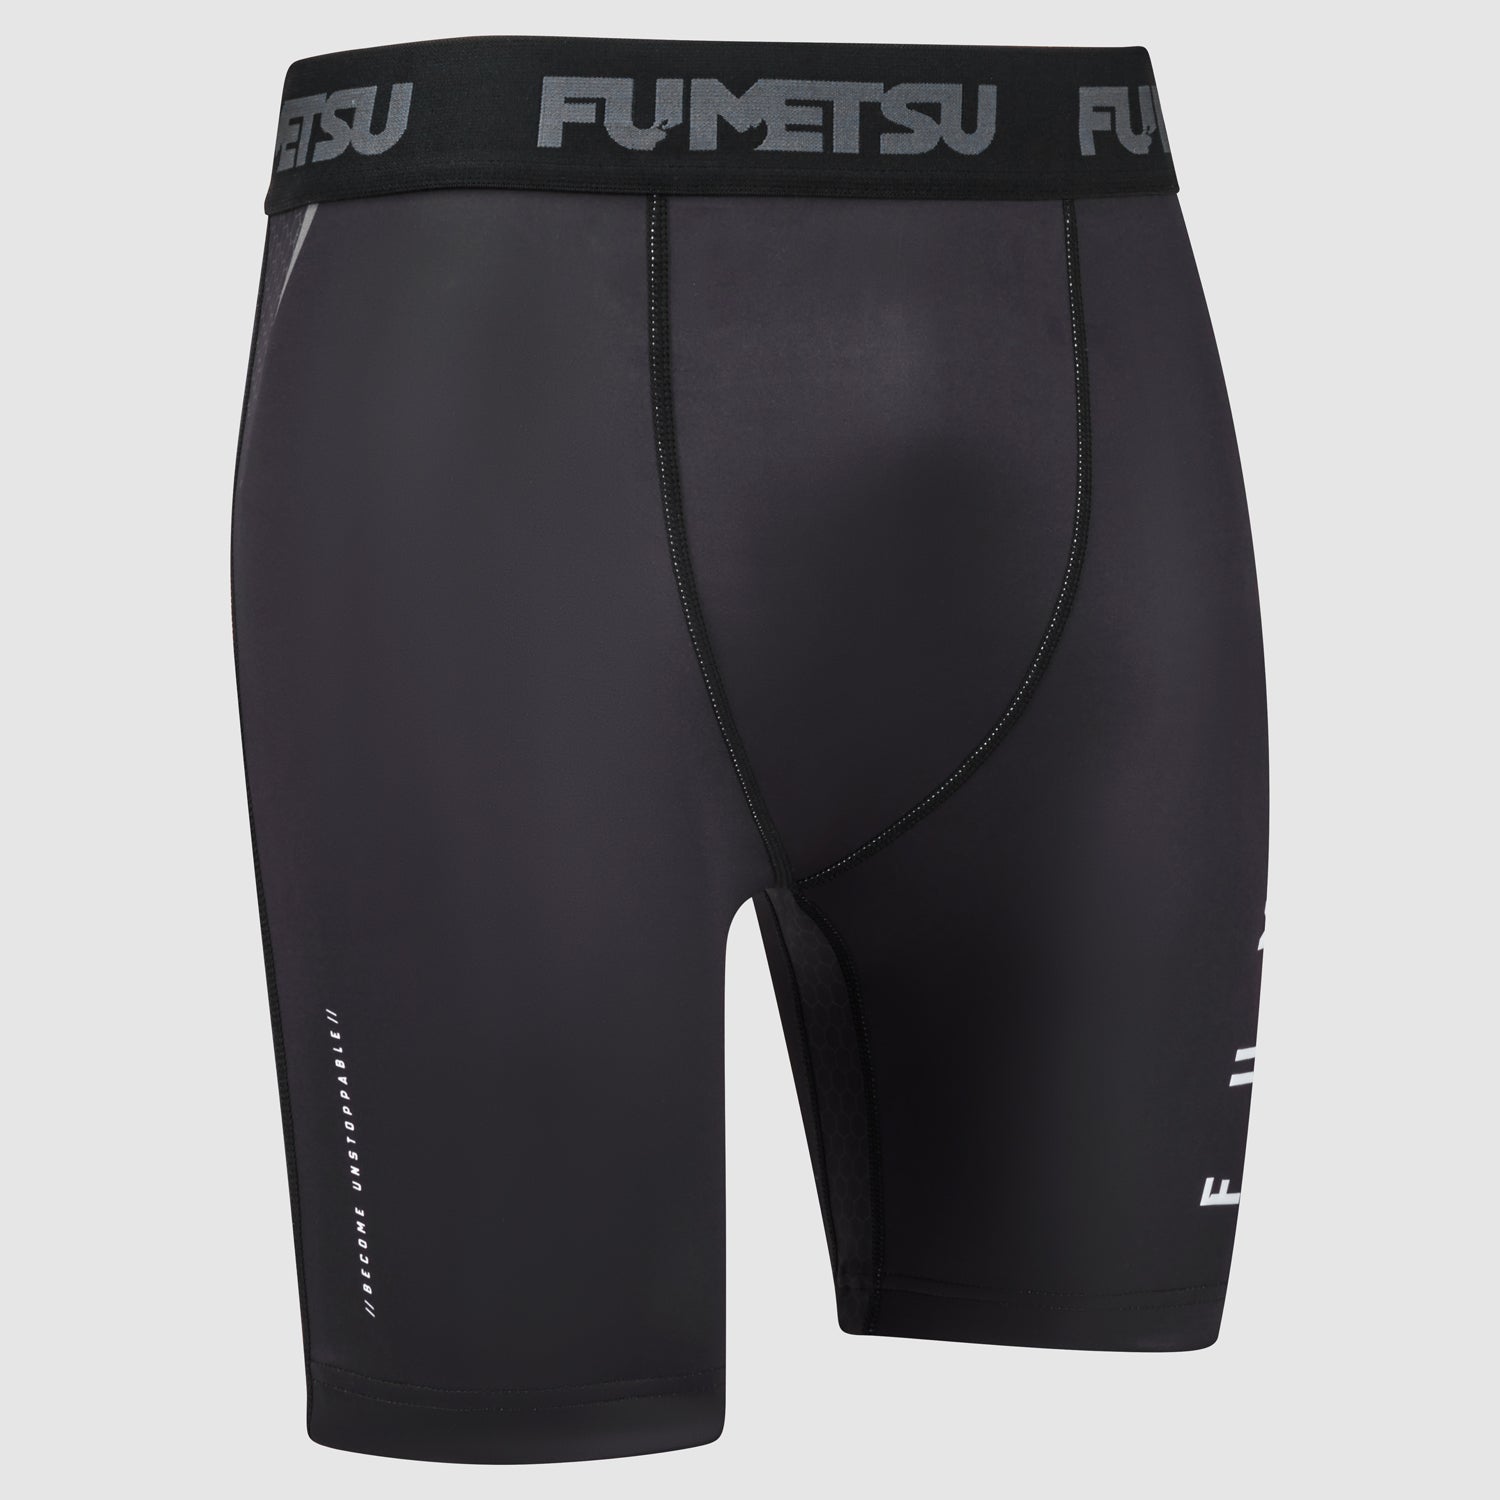 Dauntless - Loose Fit Shorts – xxx compression limited trading as